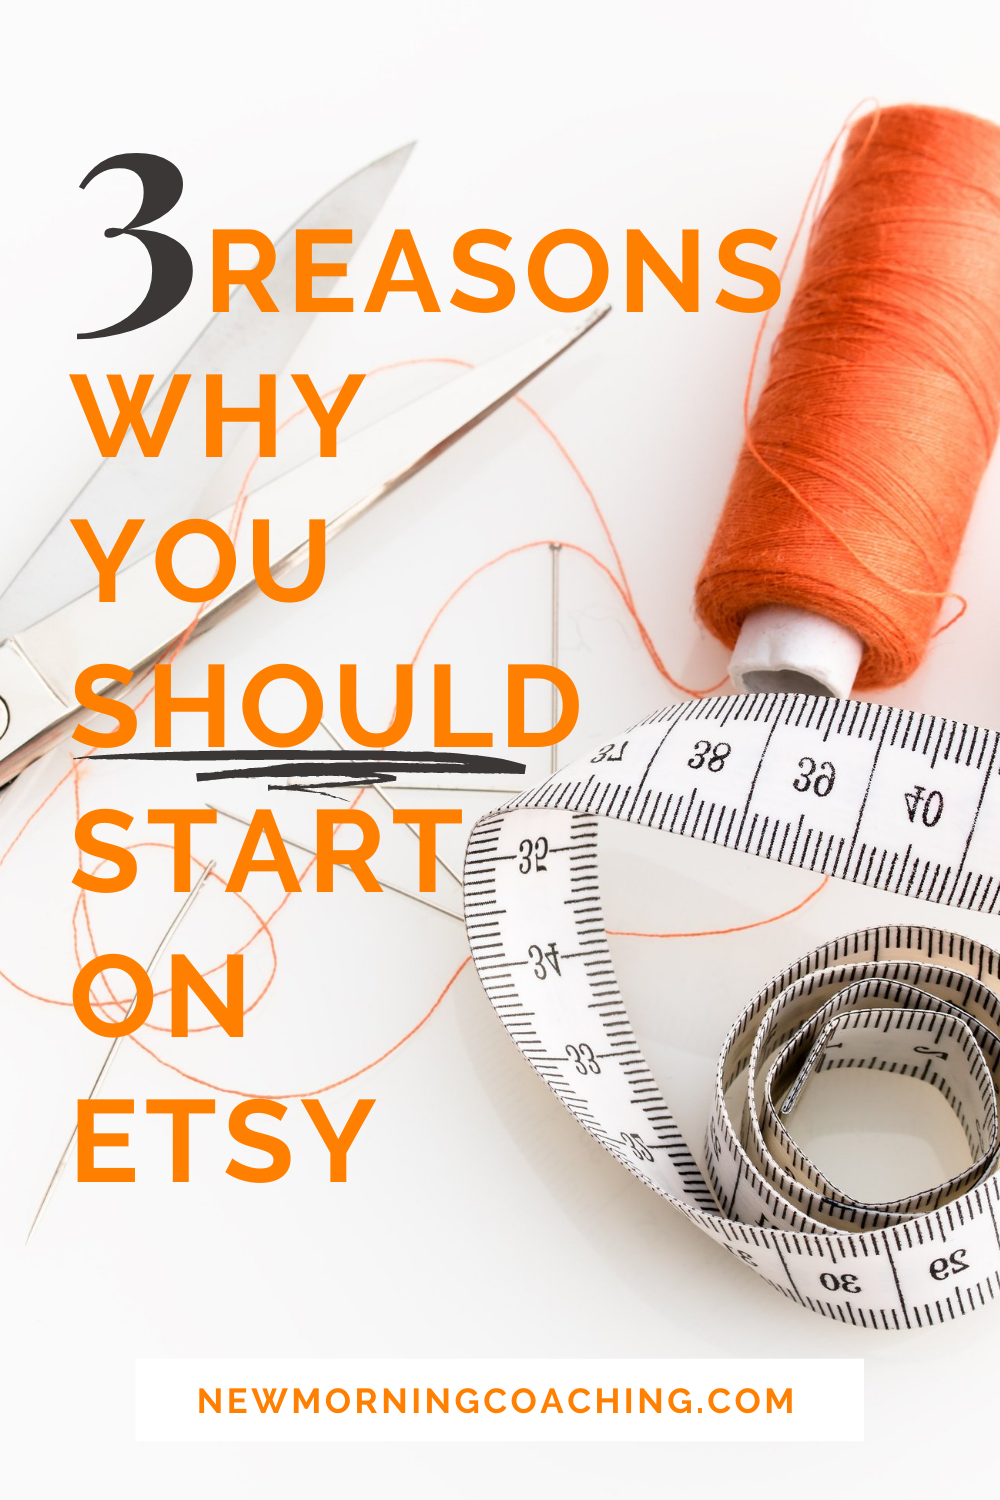 3 reasons why you should start on etsy